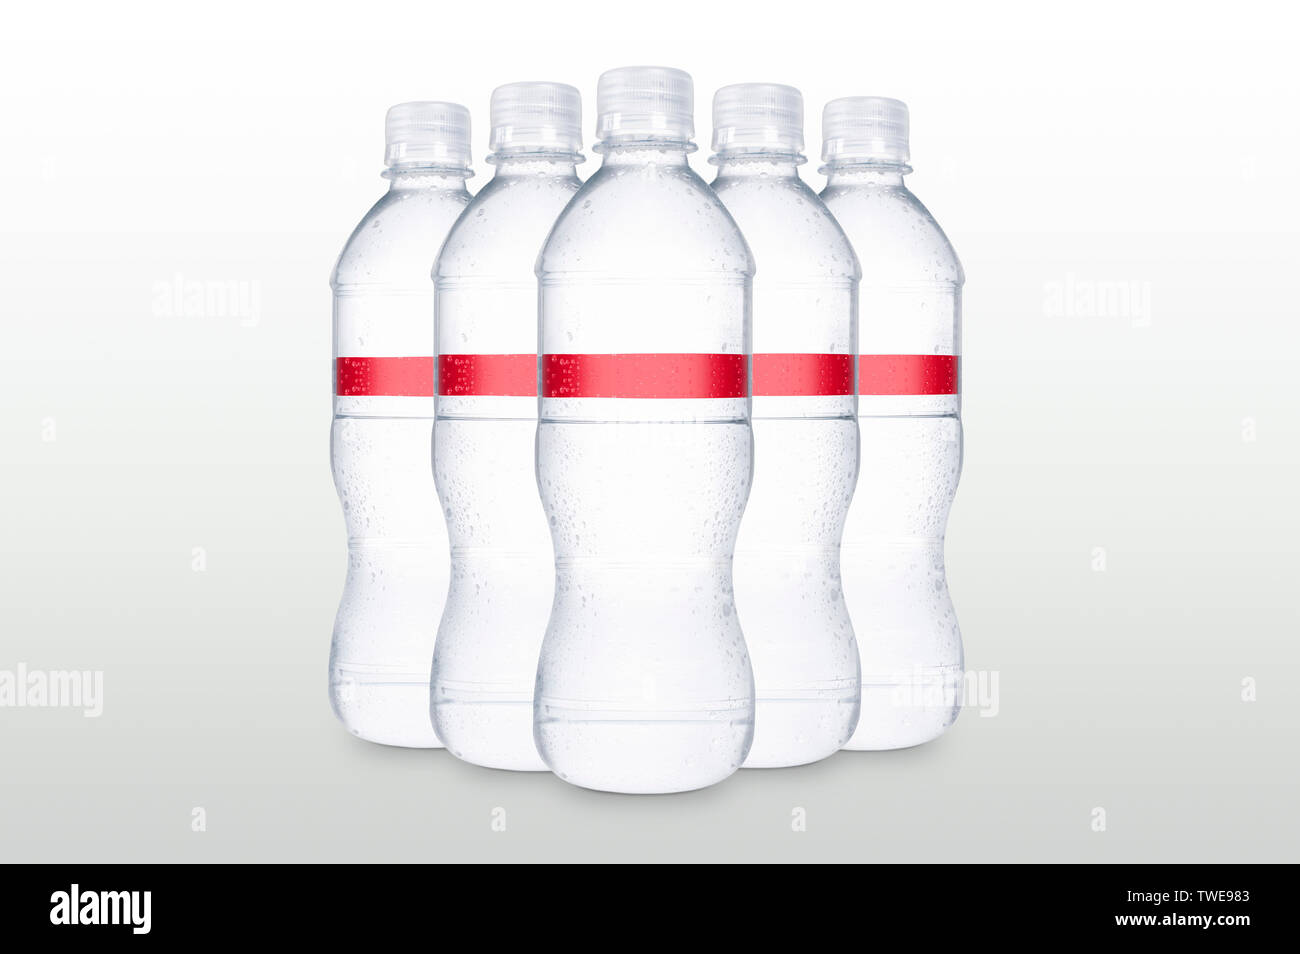 Plastic drink water bottle Stock Photo by ©scanrail 184502514